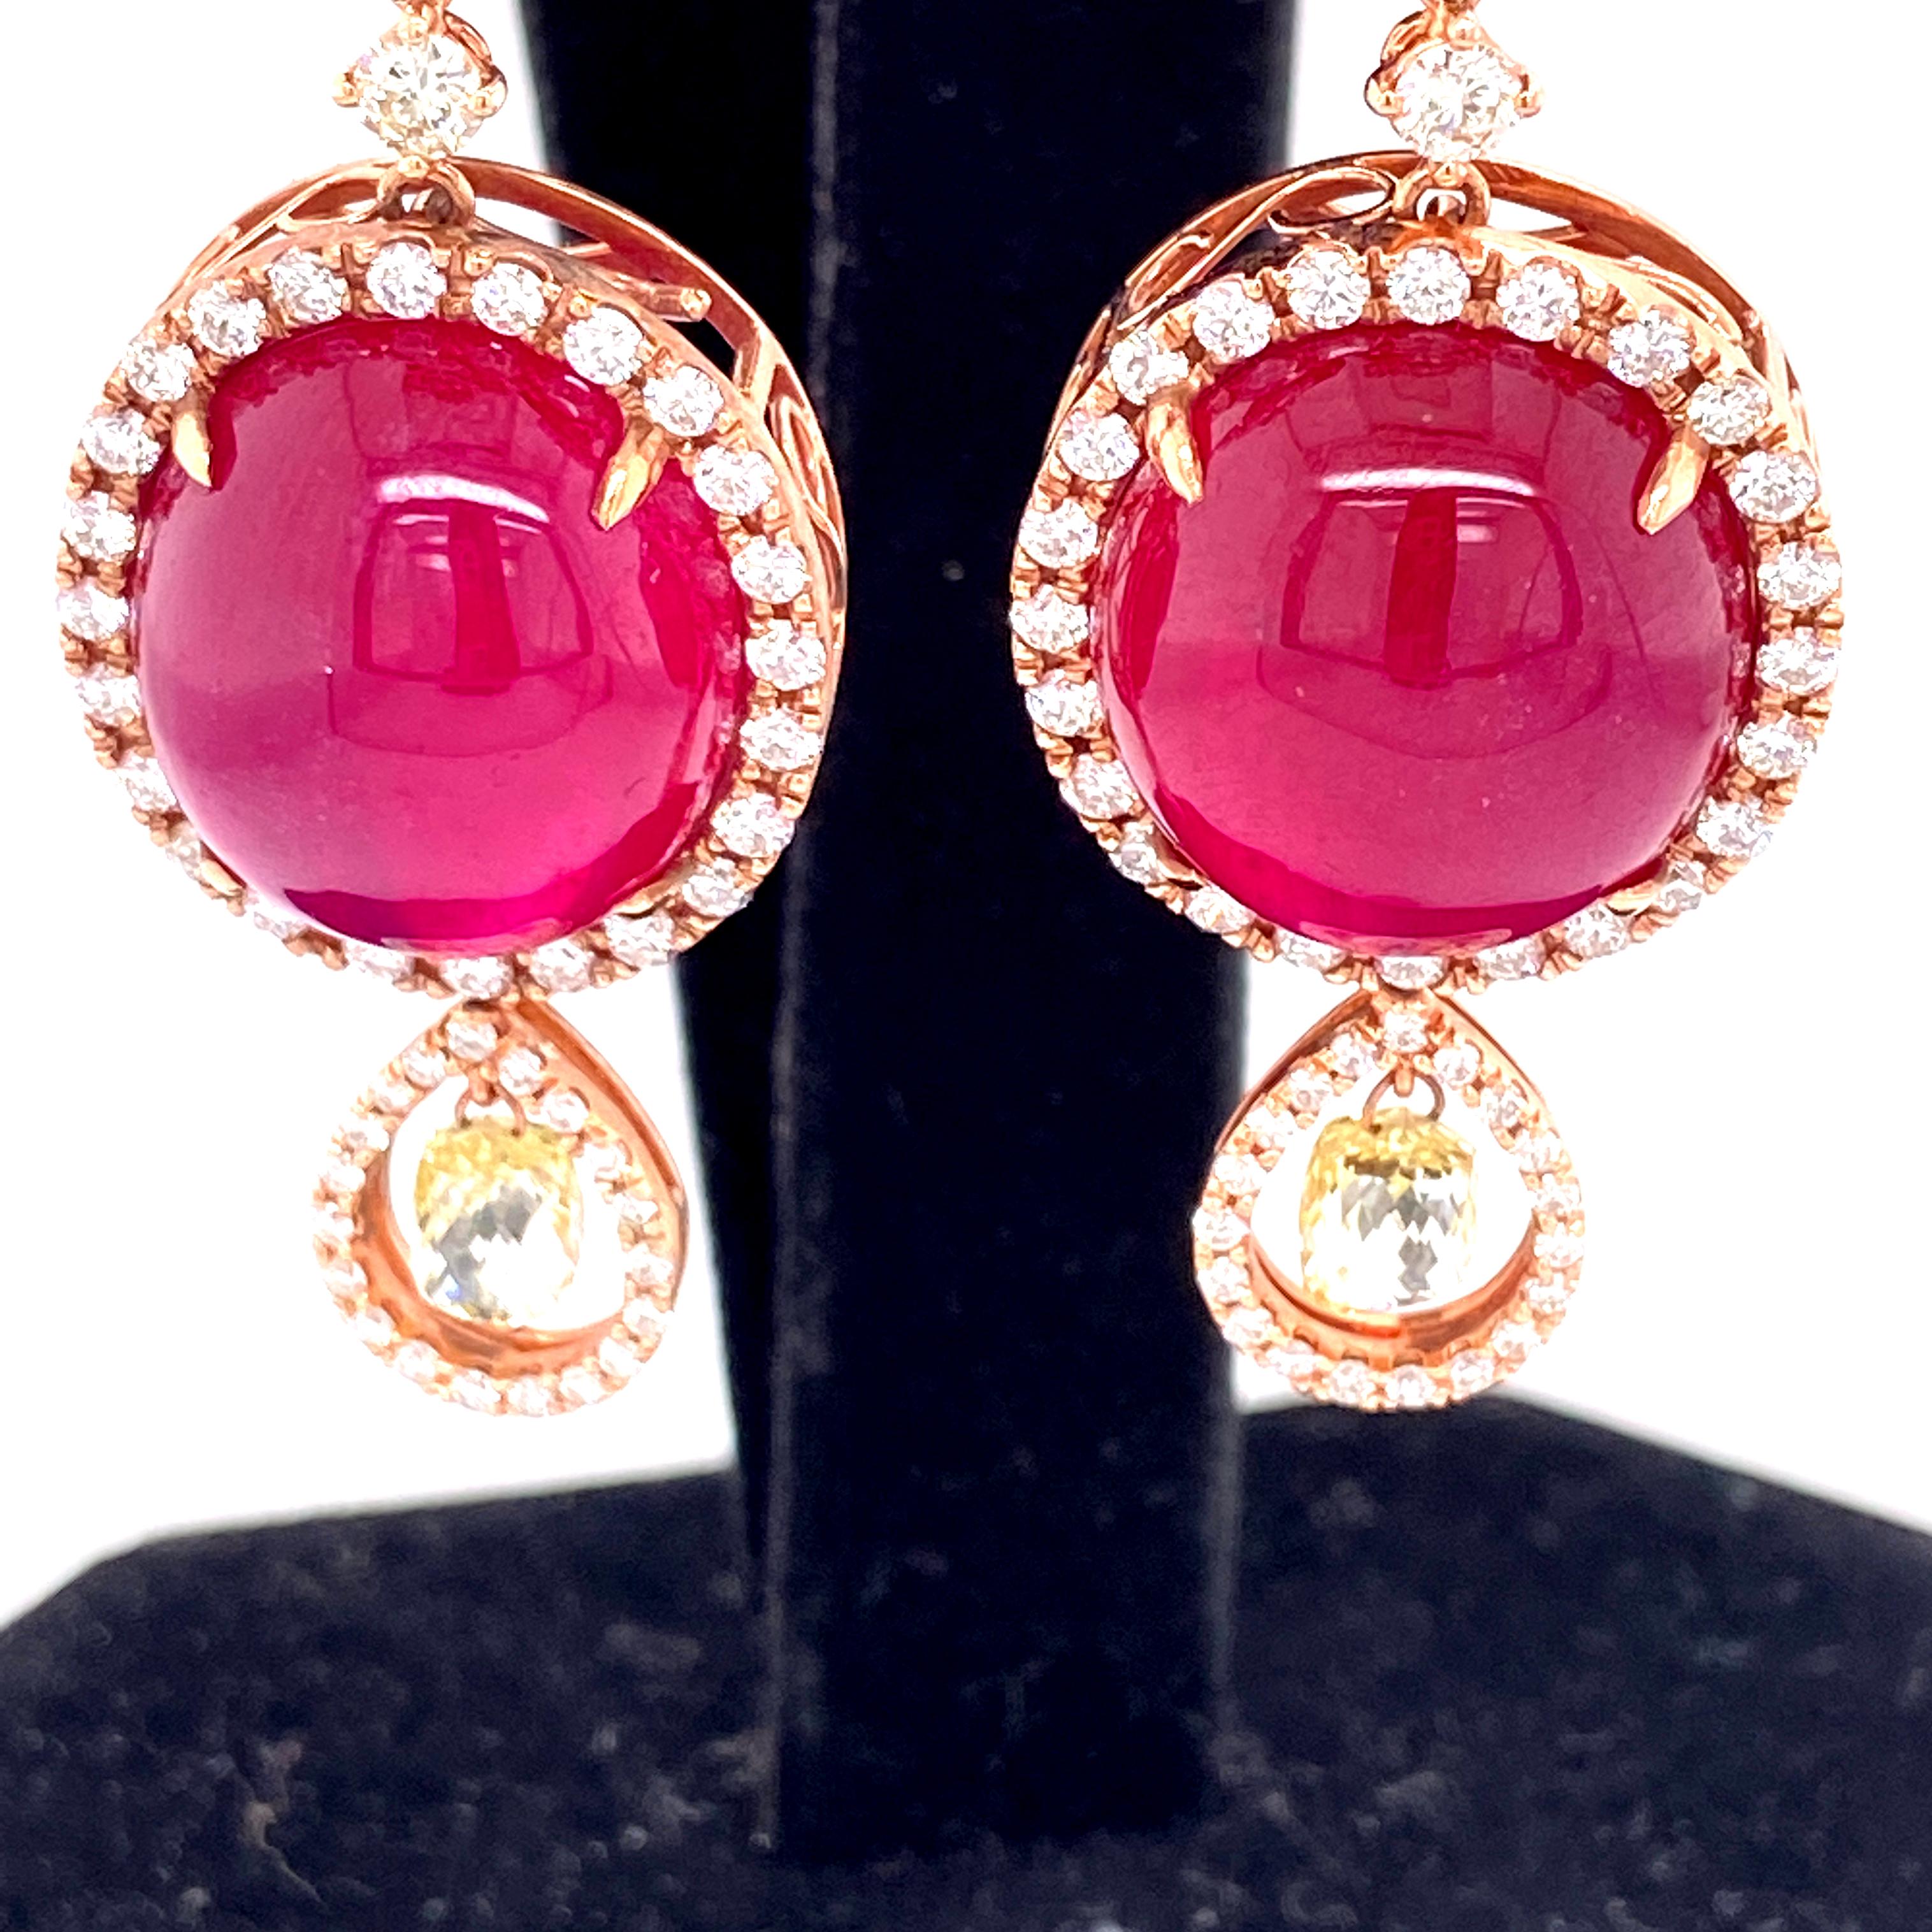 42.02 Carat Ruby Cabochon, Pink Diamond, and Diamond Briolette Gold Earrings:

A unique jewel, it features a beautiful pair of ruby cabochons weighing 42.02 carats surrounded by a halo of white diamonds weighing 1.65 carats, with yellow diamond